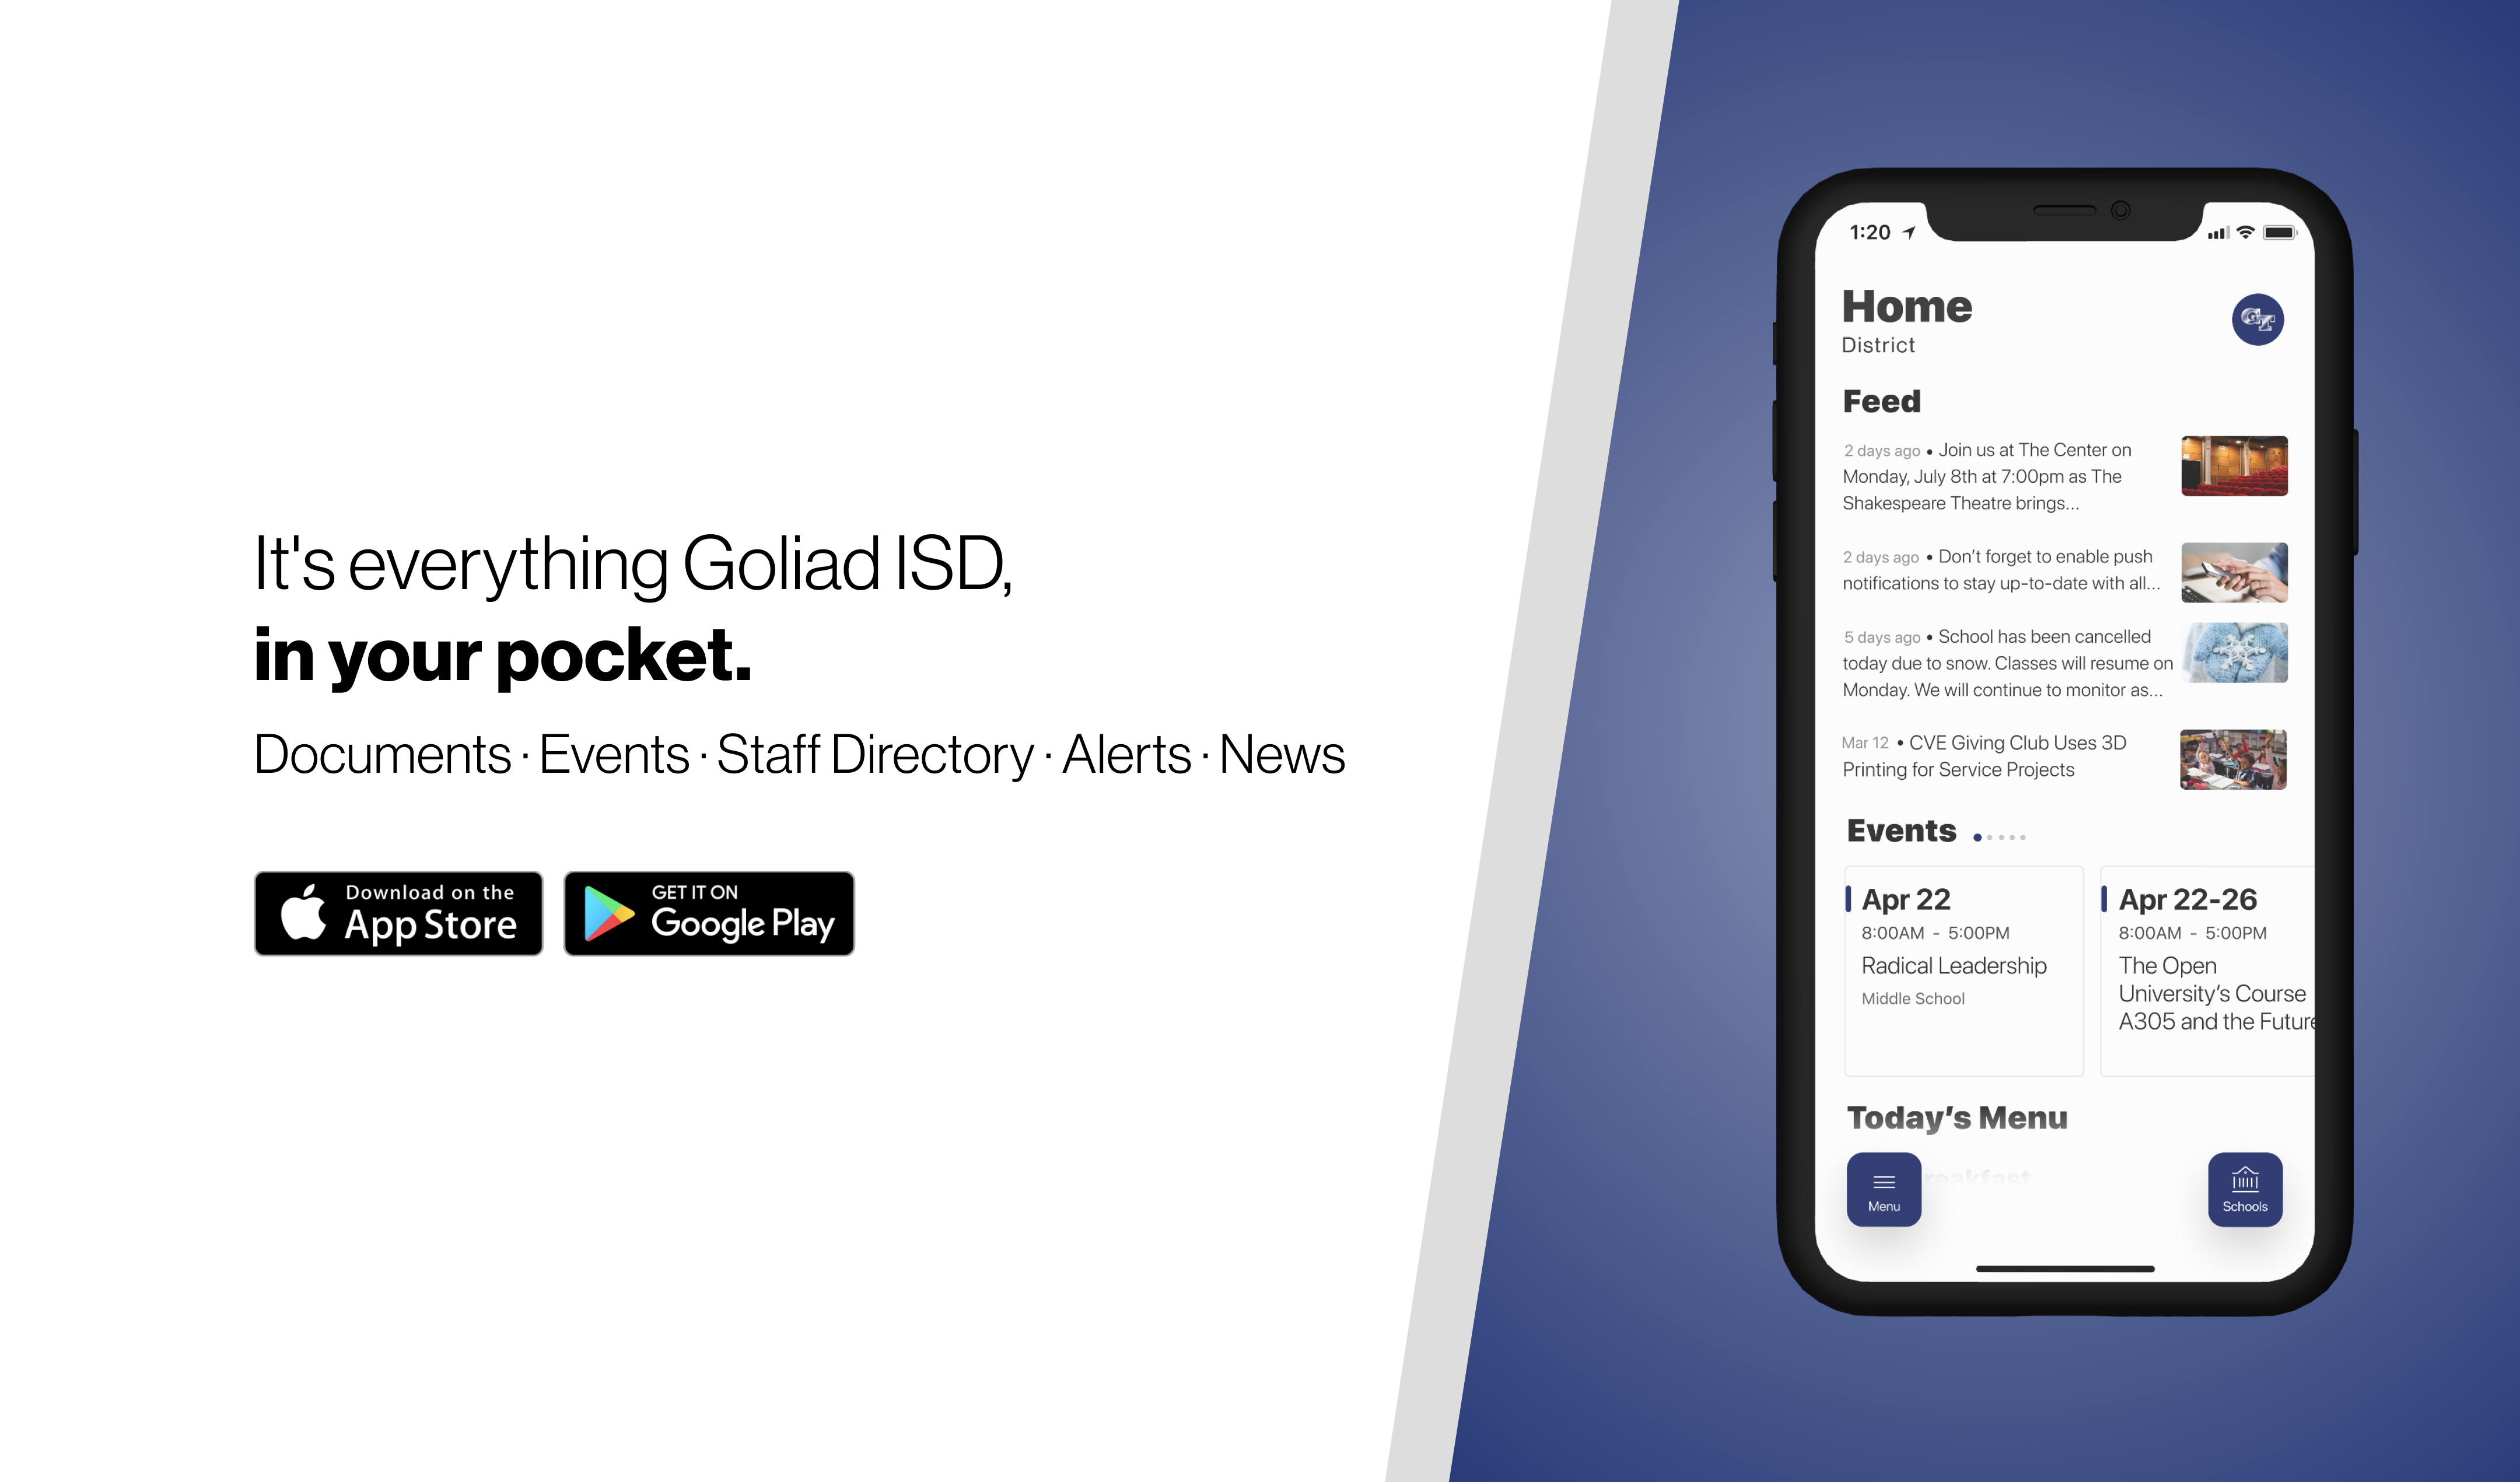 Download Goliad ISD's app on iPhone or Android